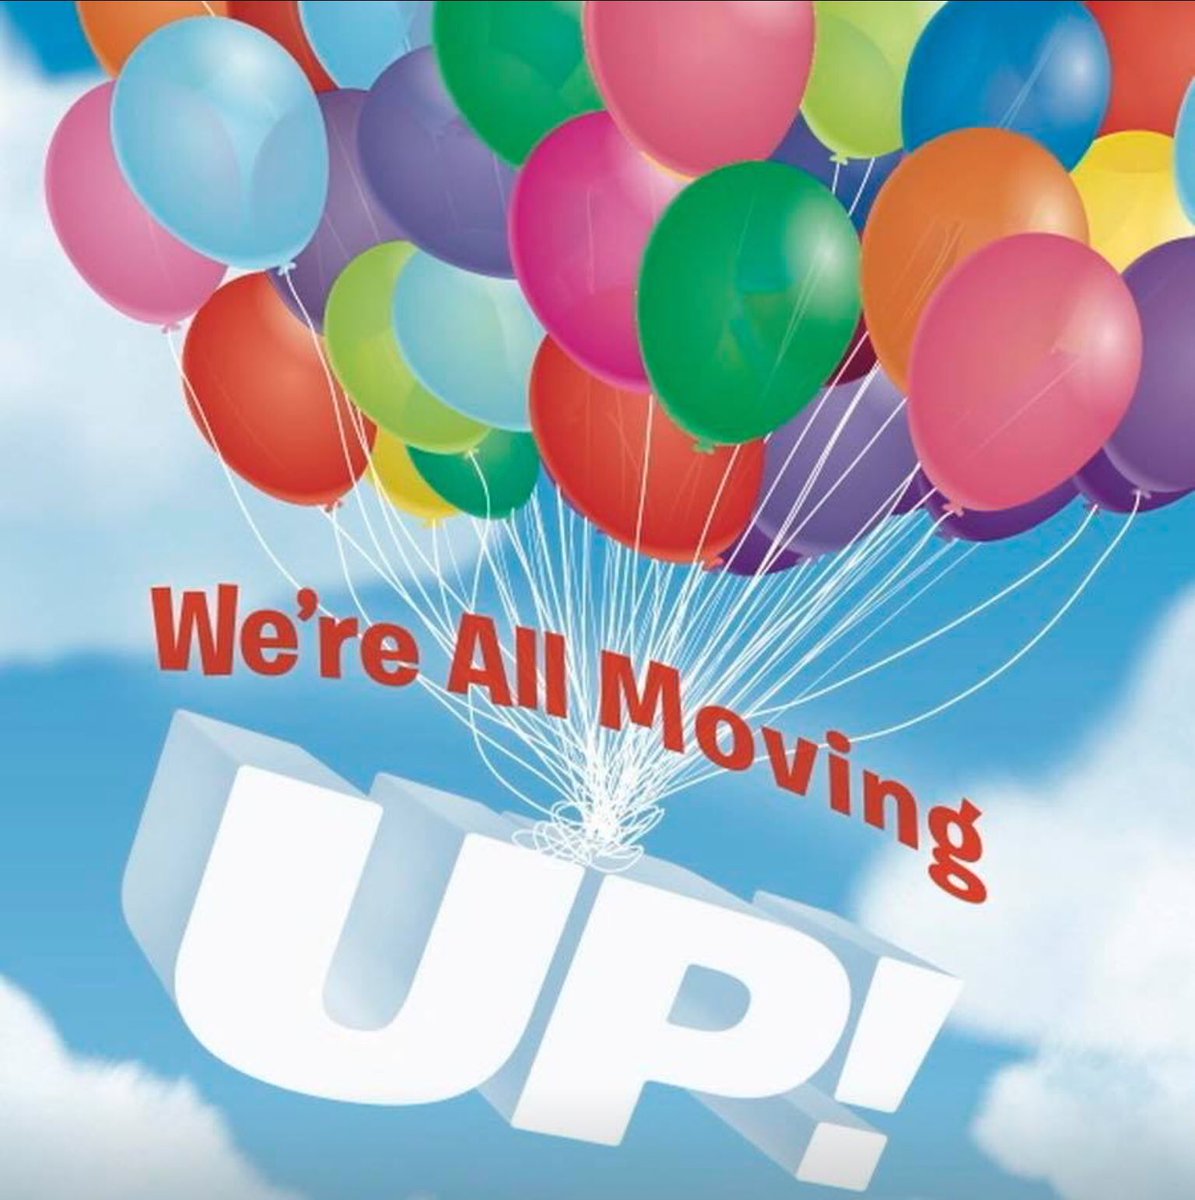 Next week, on Thursday we have our whole school ‘Moving Up Day’. 
Look out for the letter that will be sent home early next week telling you which class and teacher your child will be moving to. 
Exciting week ahead... #nextsteps #movingon #newbeginningsahead